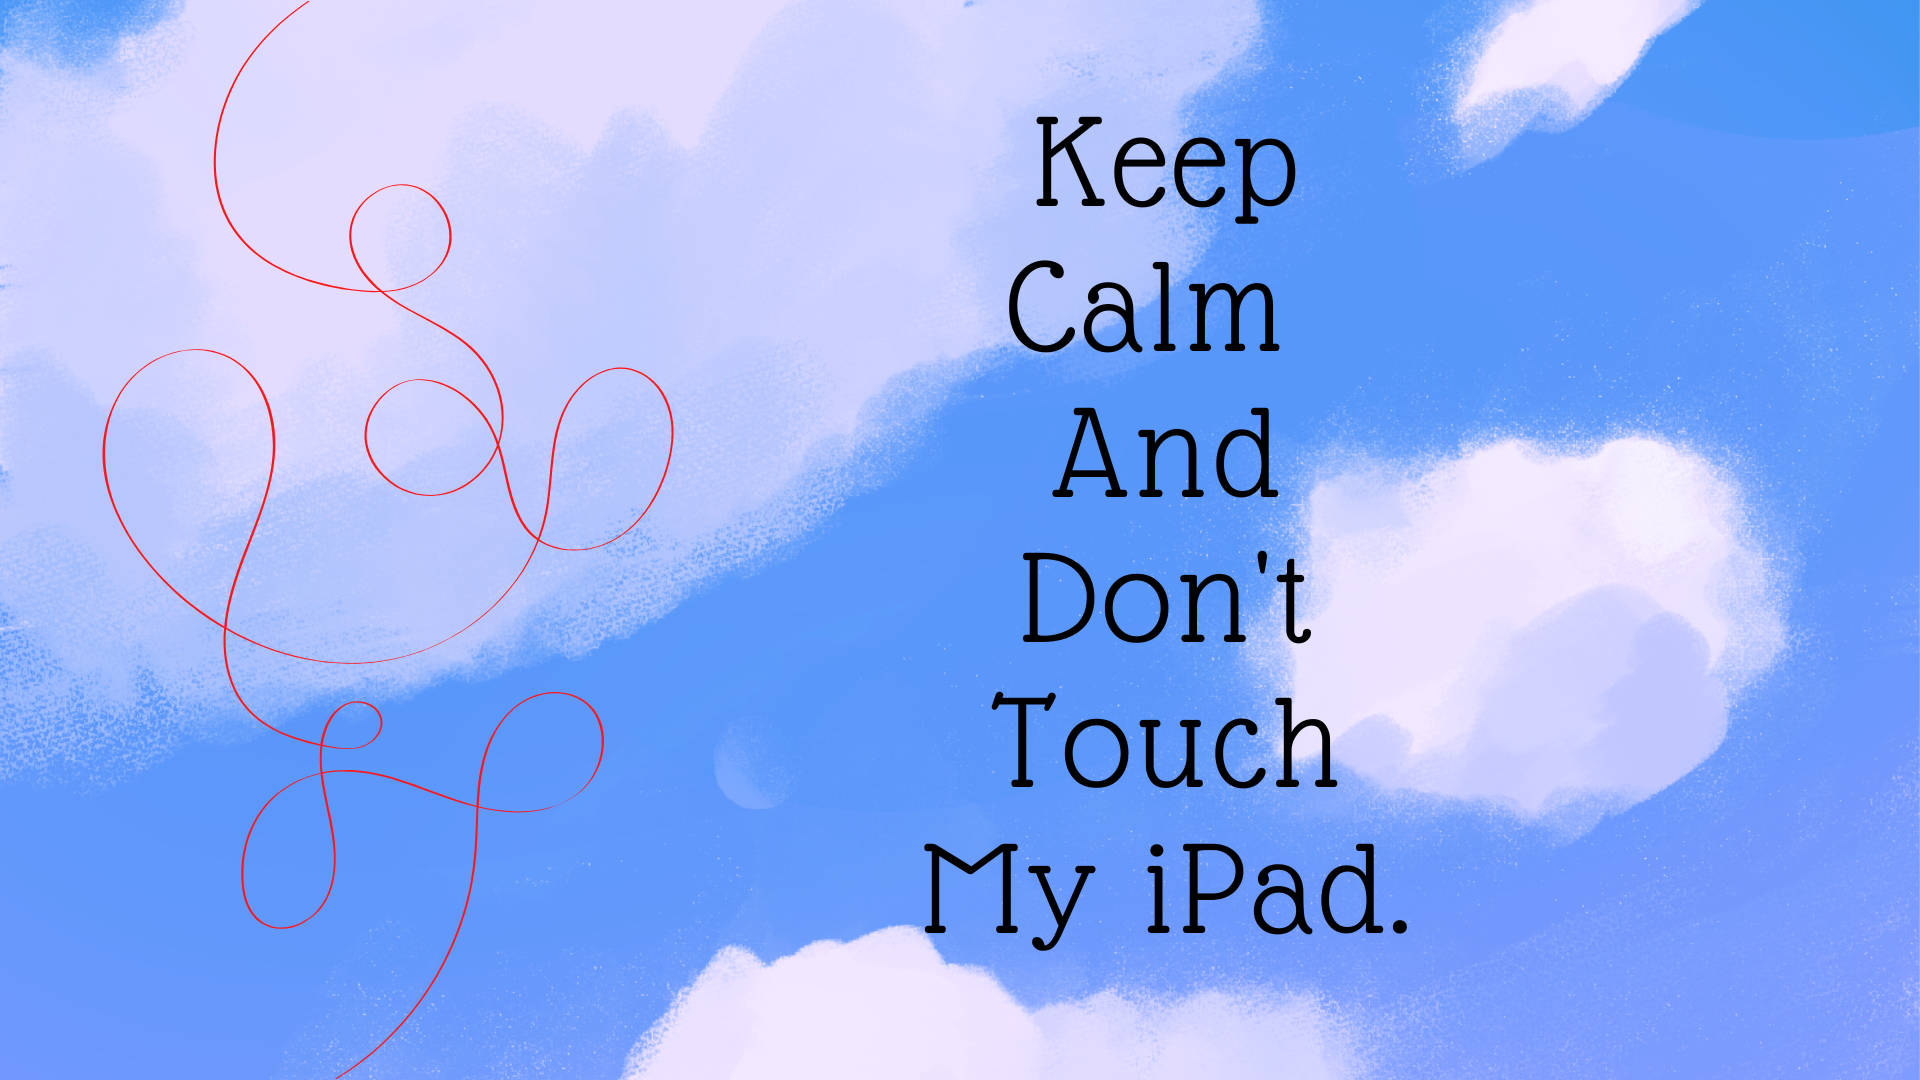 Keep Calm And Don’t Touch My iPad Wallpaper